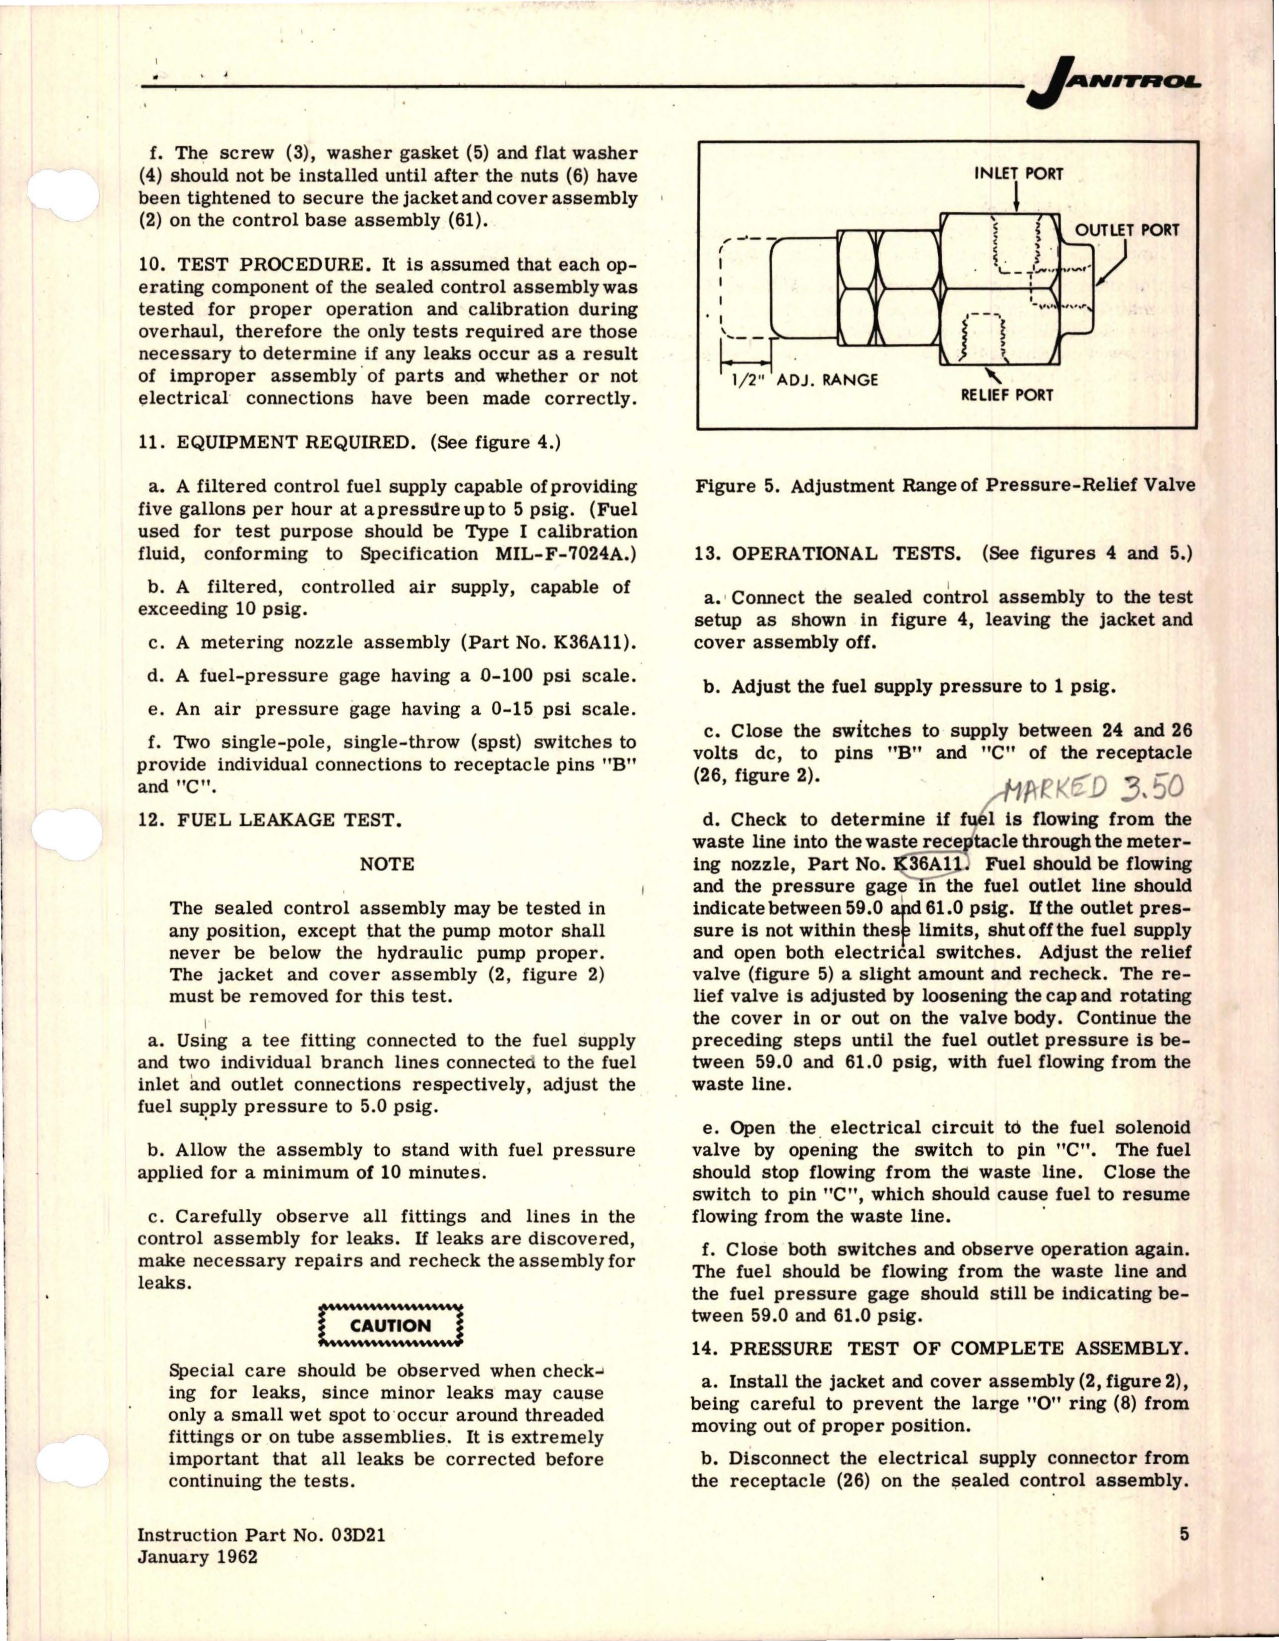 Sample page 5 from AirCorps Library document: Maintenance Instructions for Sealed Control Assembly - Parts 54C00 and A54C00